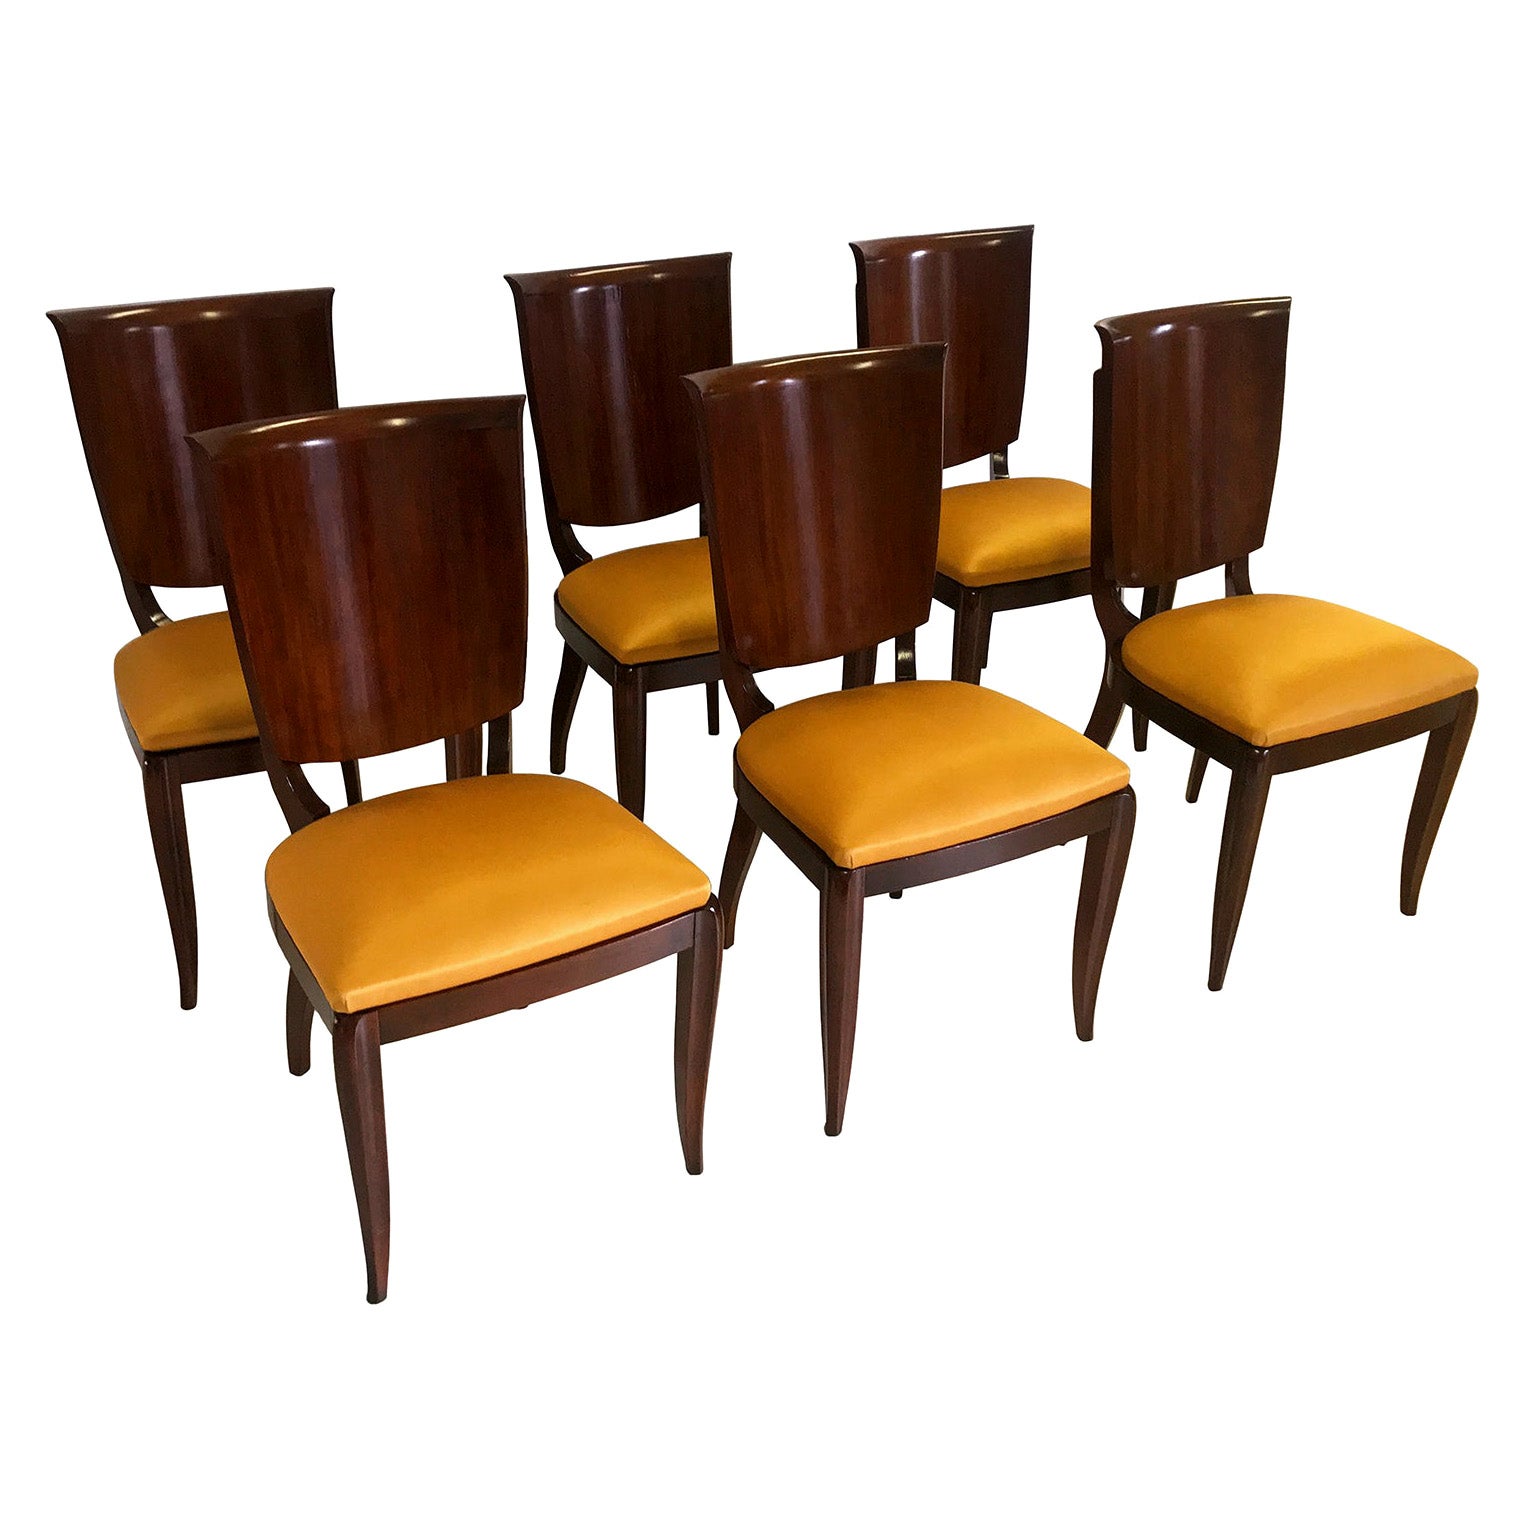 Italian Mid-Century Yellow Dining Chairs by Vittorio Dassi, Set of Six, 1950s For Sale